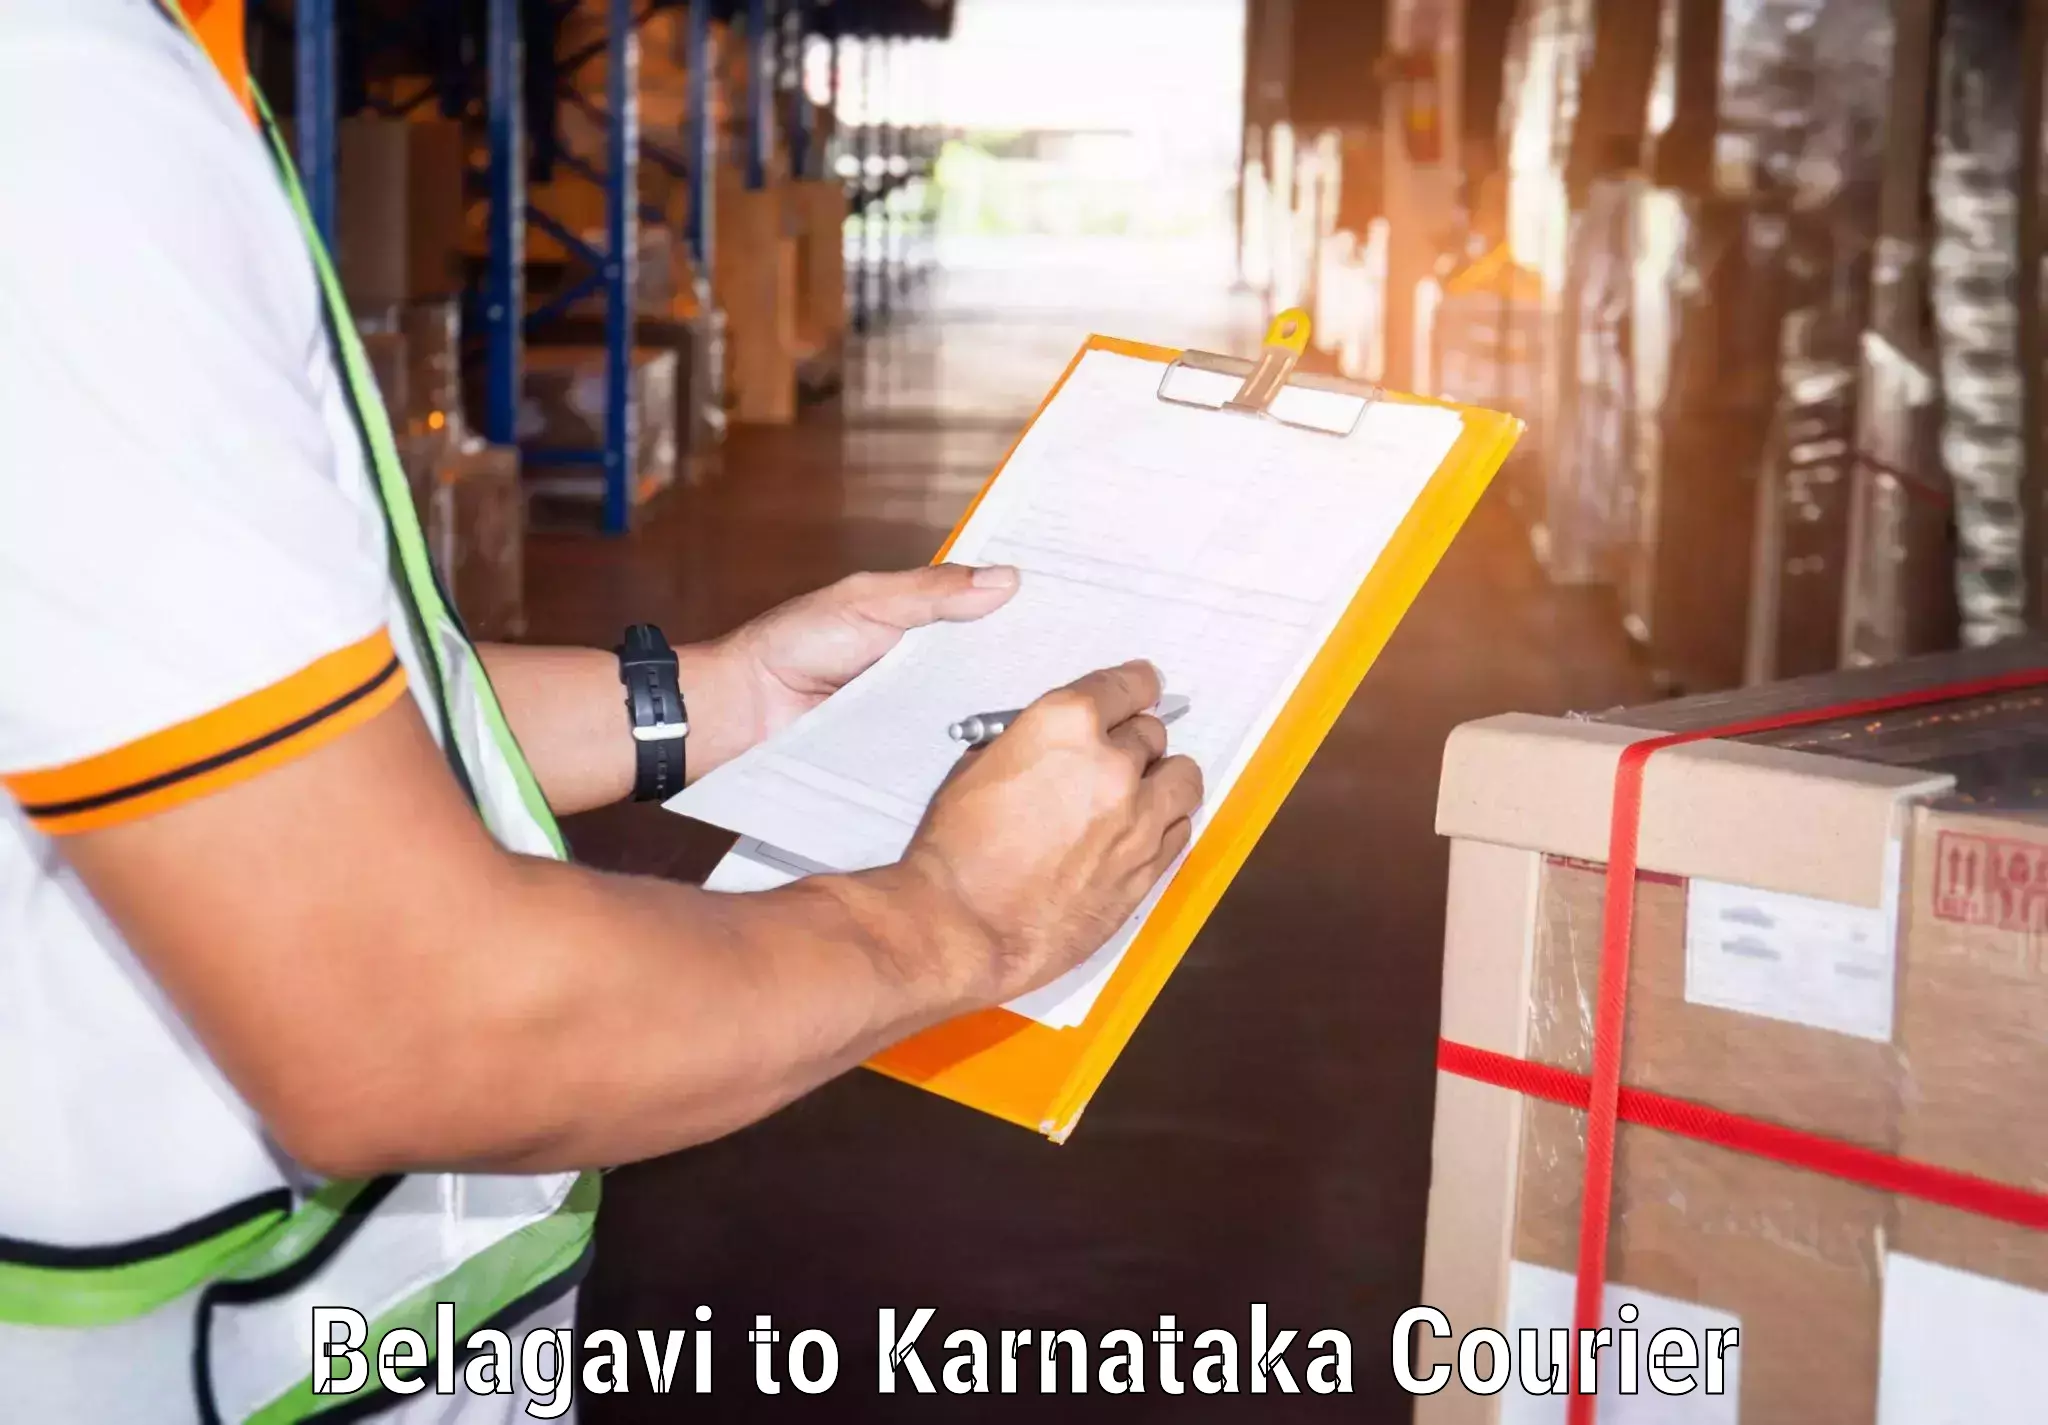 State-of-the-art courier technology Belagavi to Ramanathapura